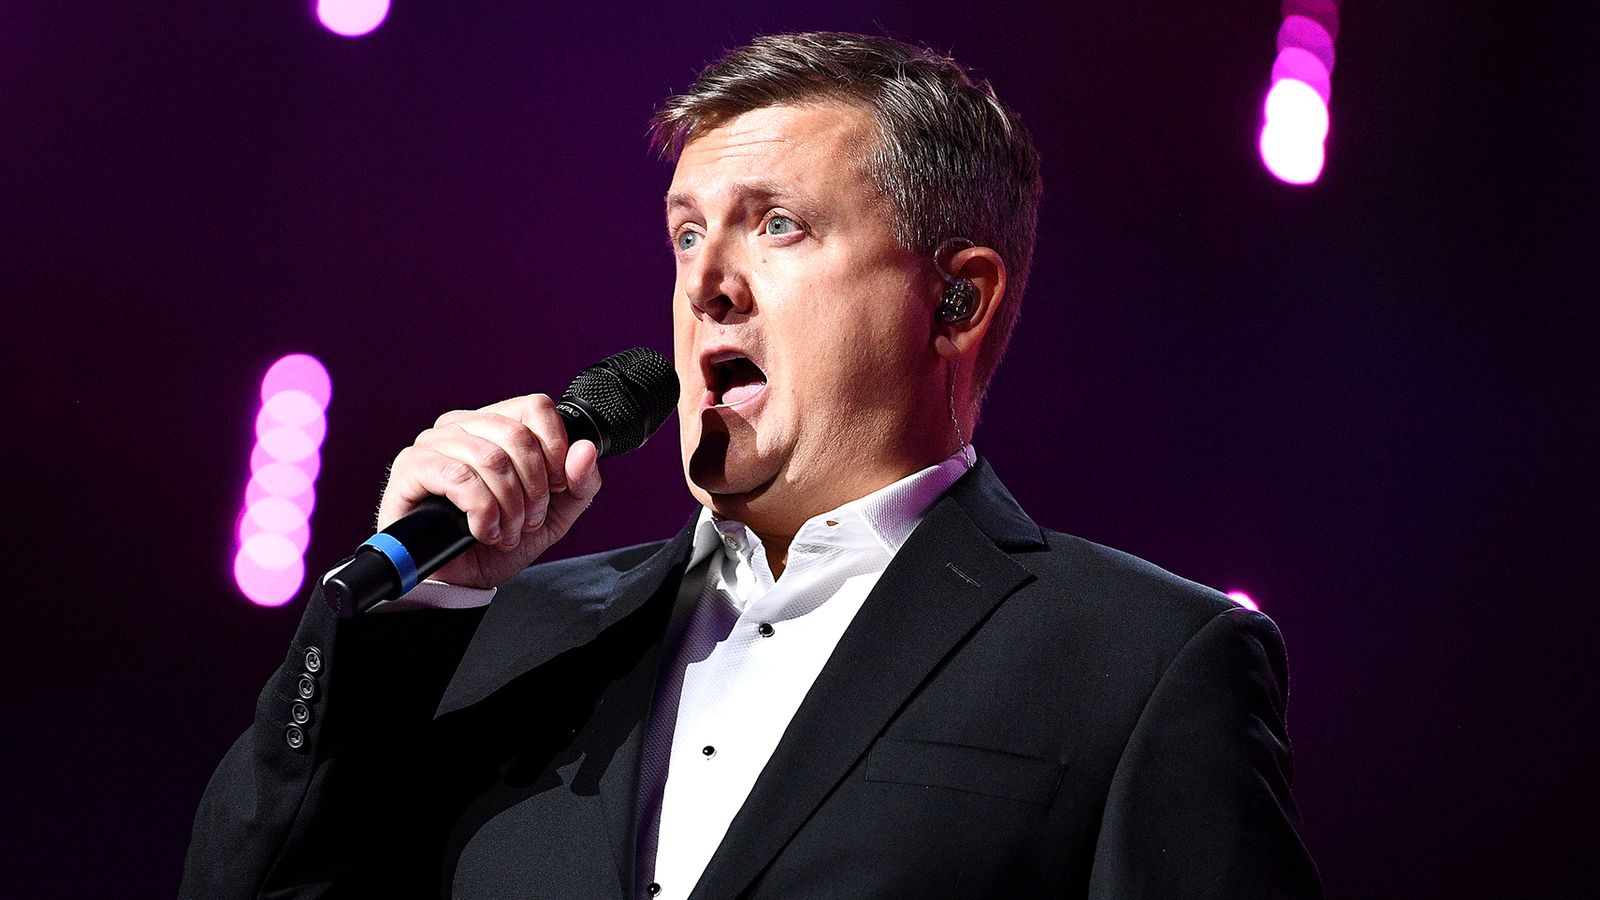 Aled Jones: Teenager 'threatened to cut off singer's arm' during Rolex robbery